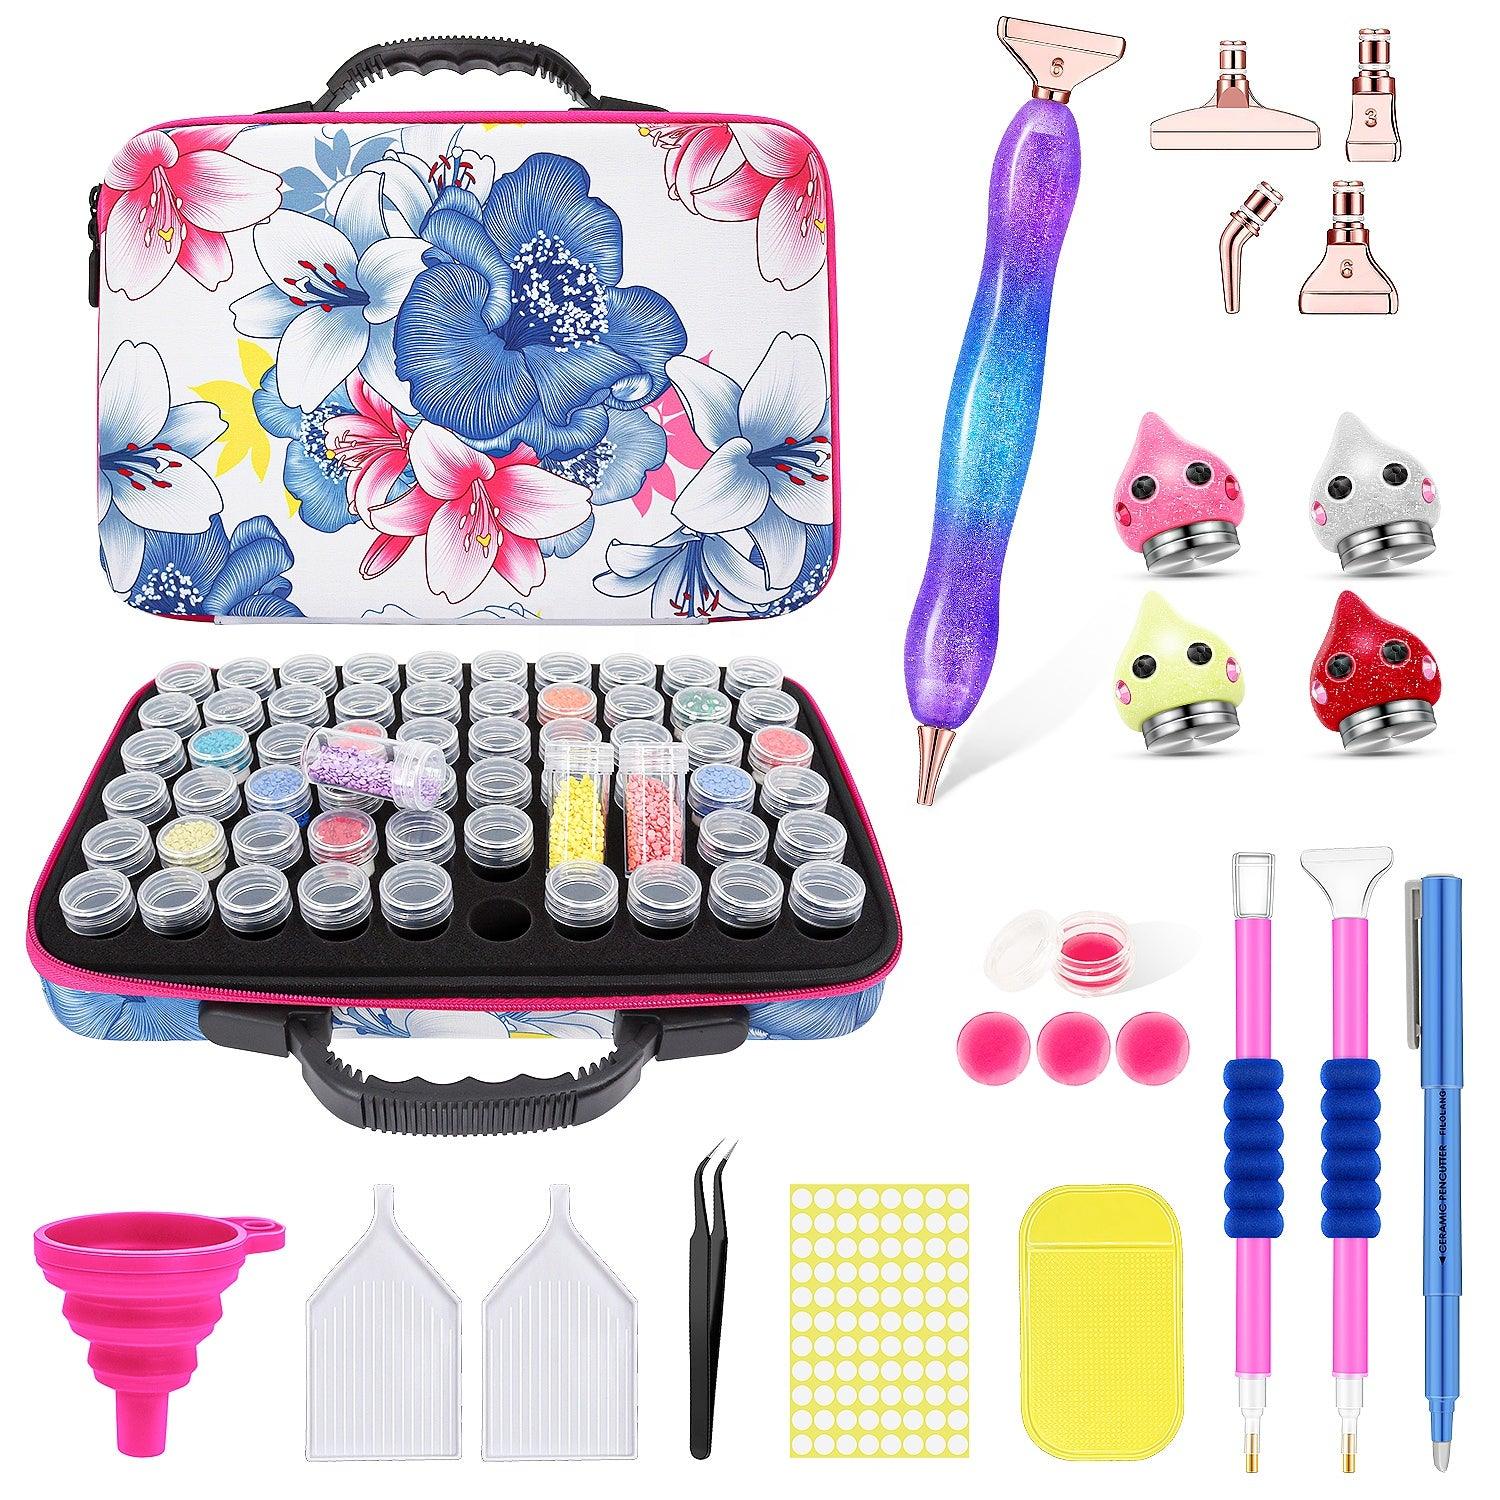 Floral 80 in 1 Diamond Painting Tool Kits Storage Container